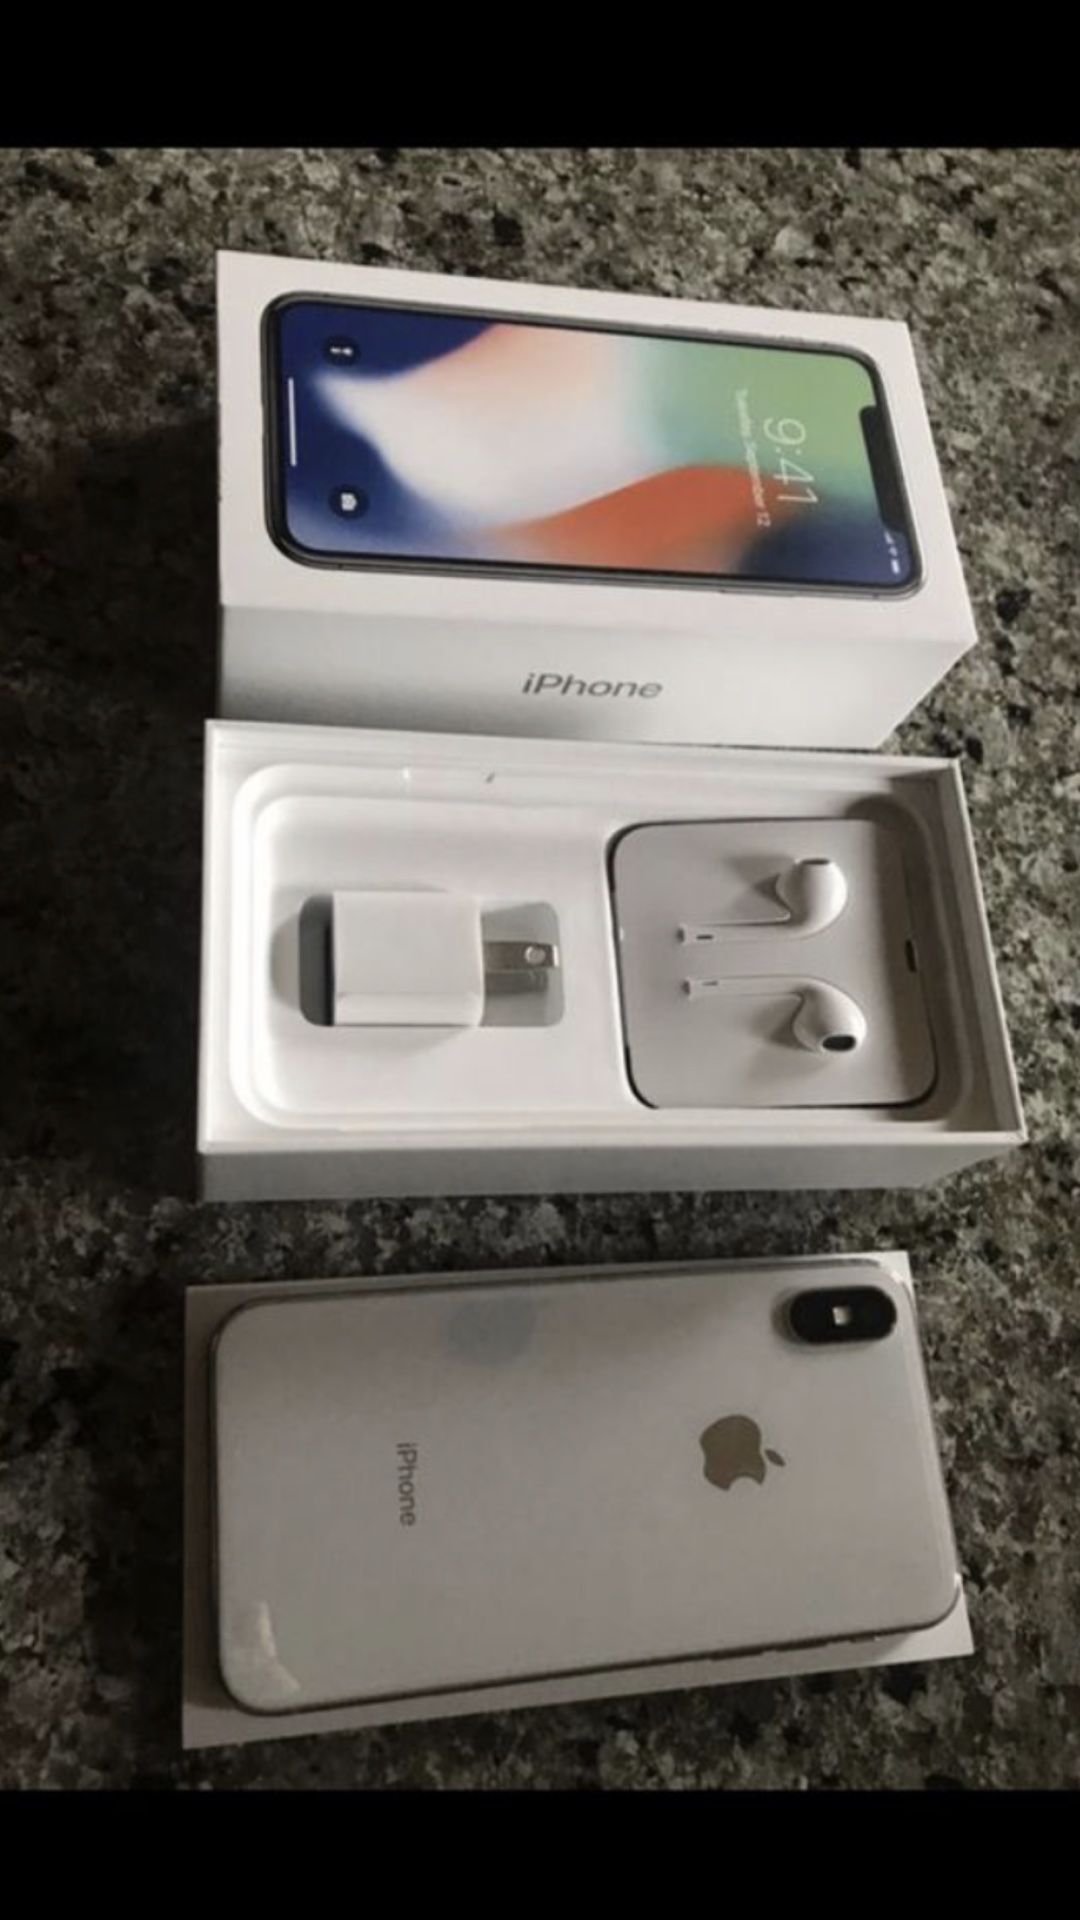 iPhone X 256 silver and white unlocked with box and accessories untouched